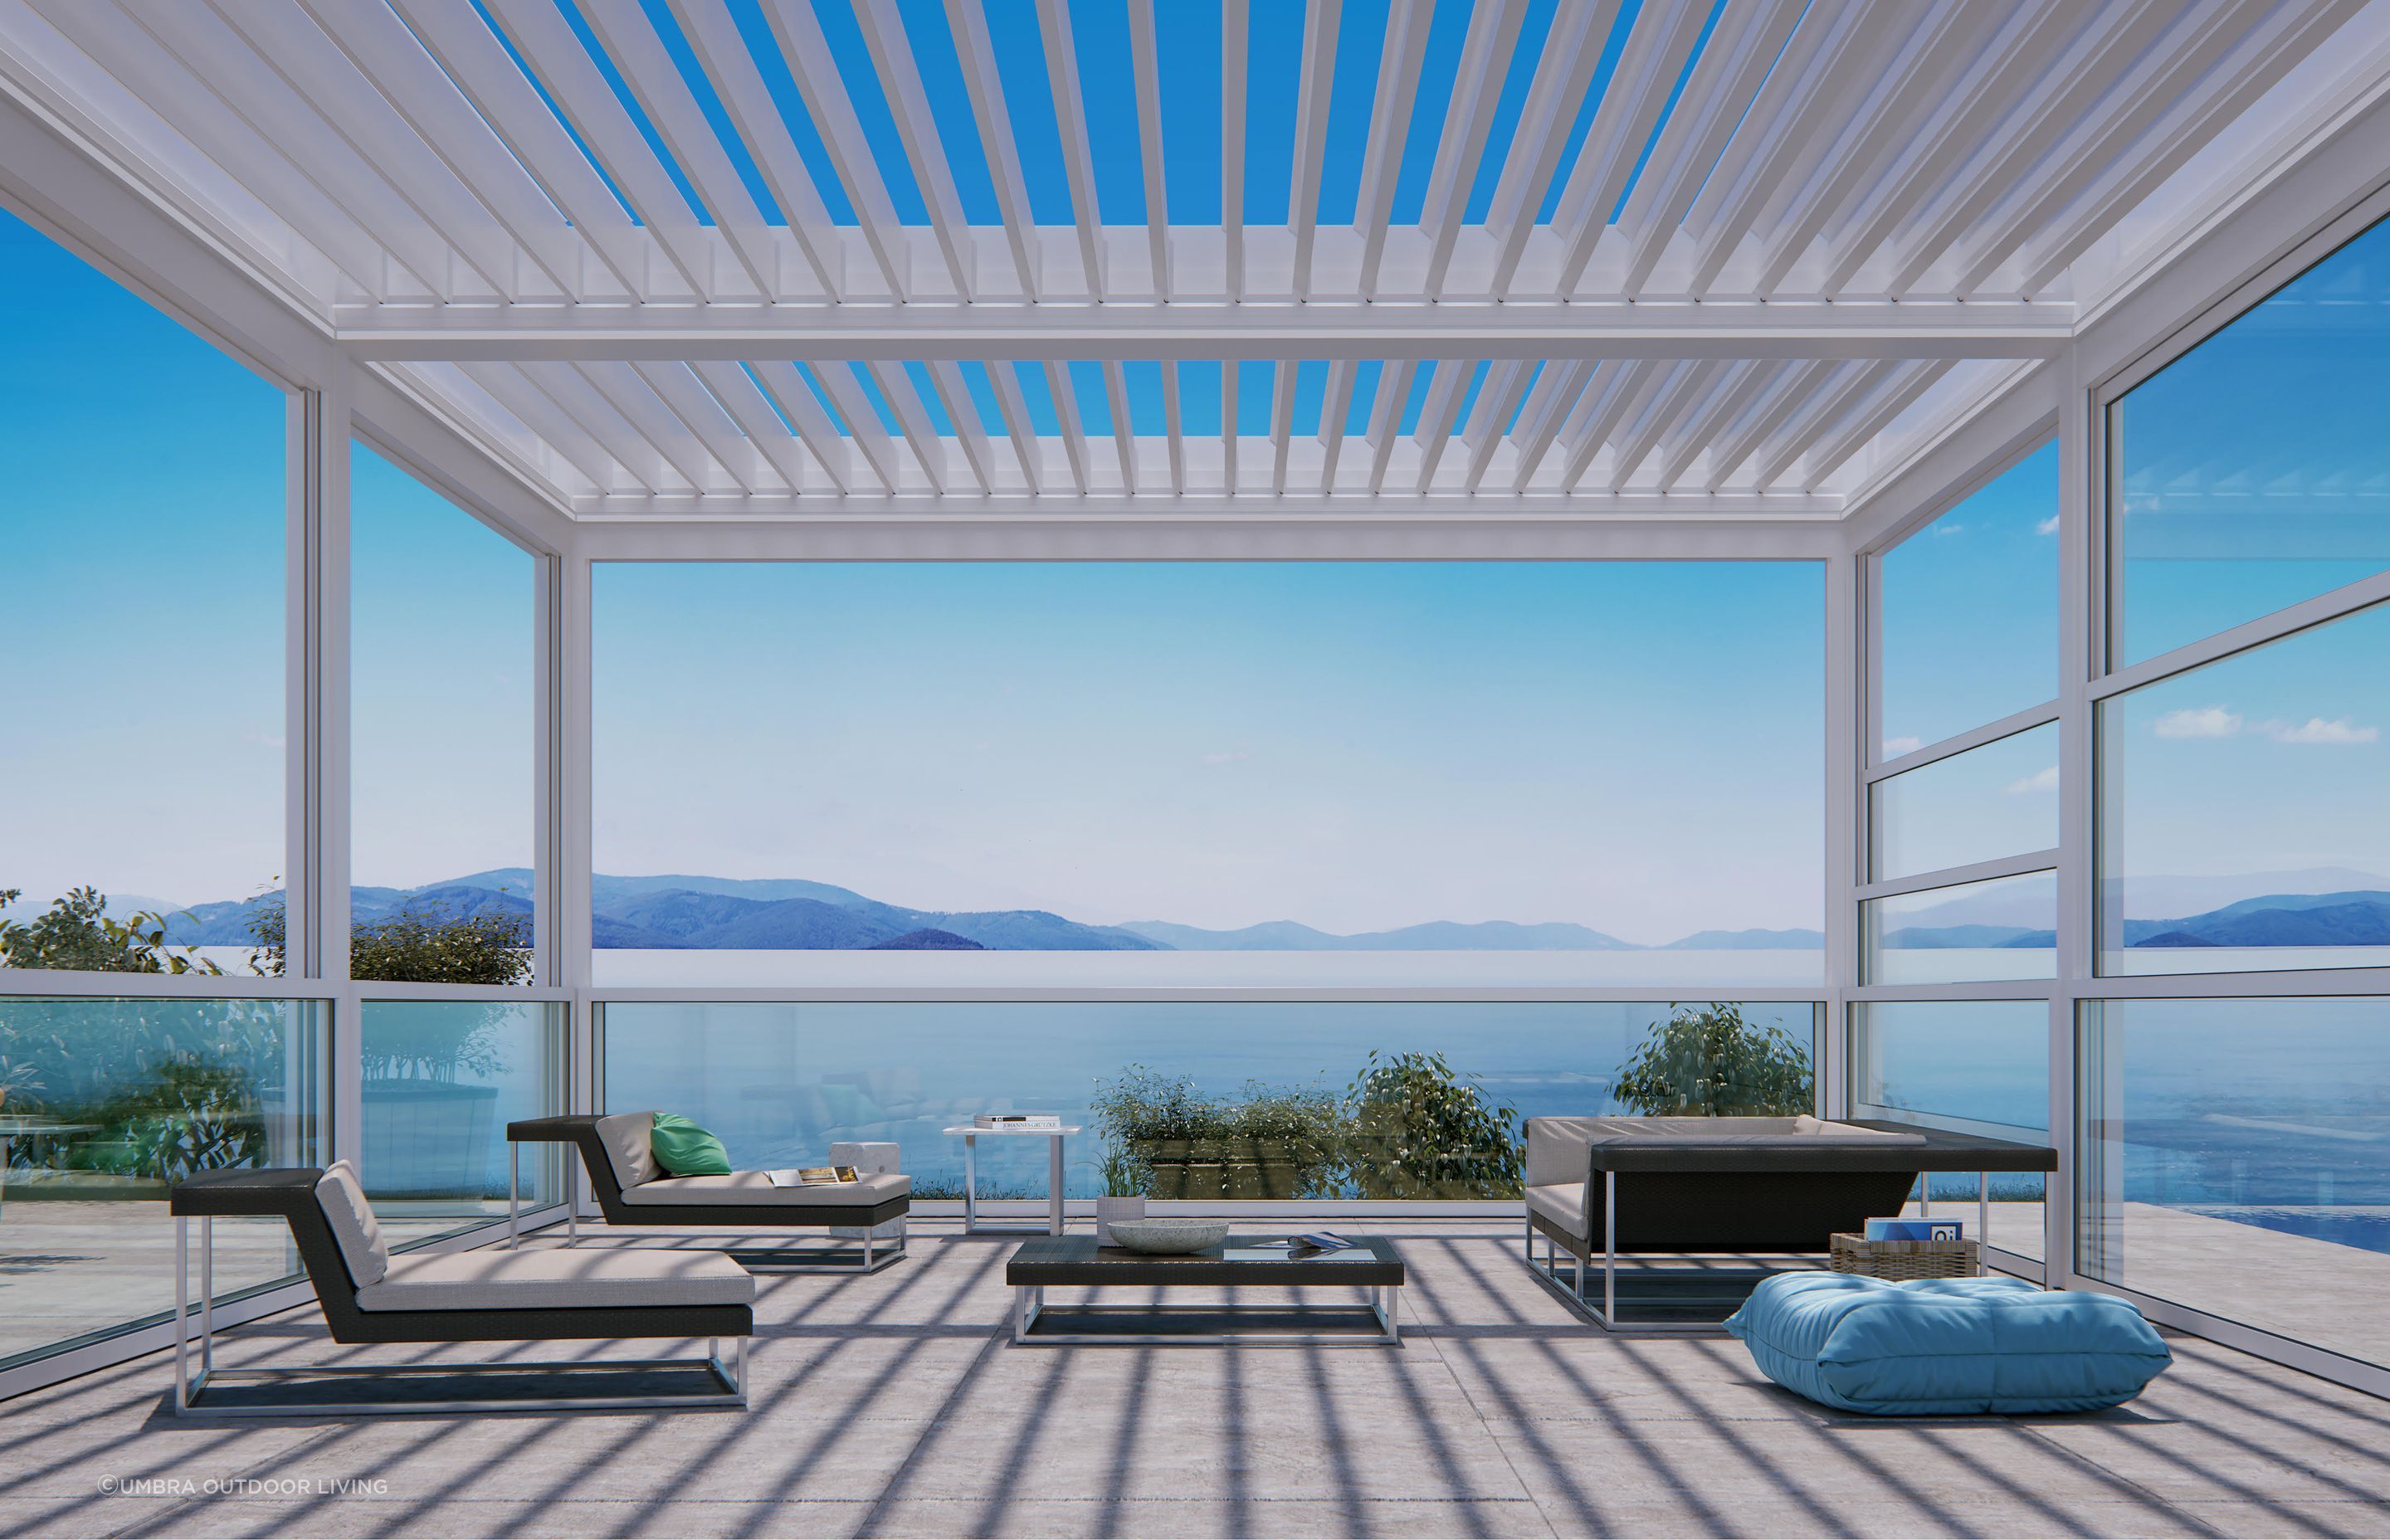 With aluminium louvres and an automation system that is fully hidden, the AXIS Tilting Bioclimatic Pergola is a stylish shade solution